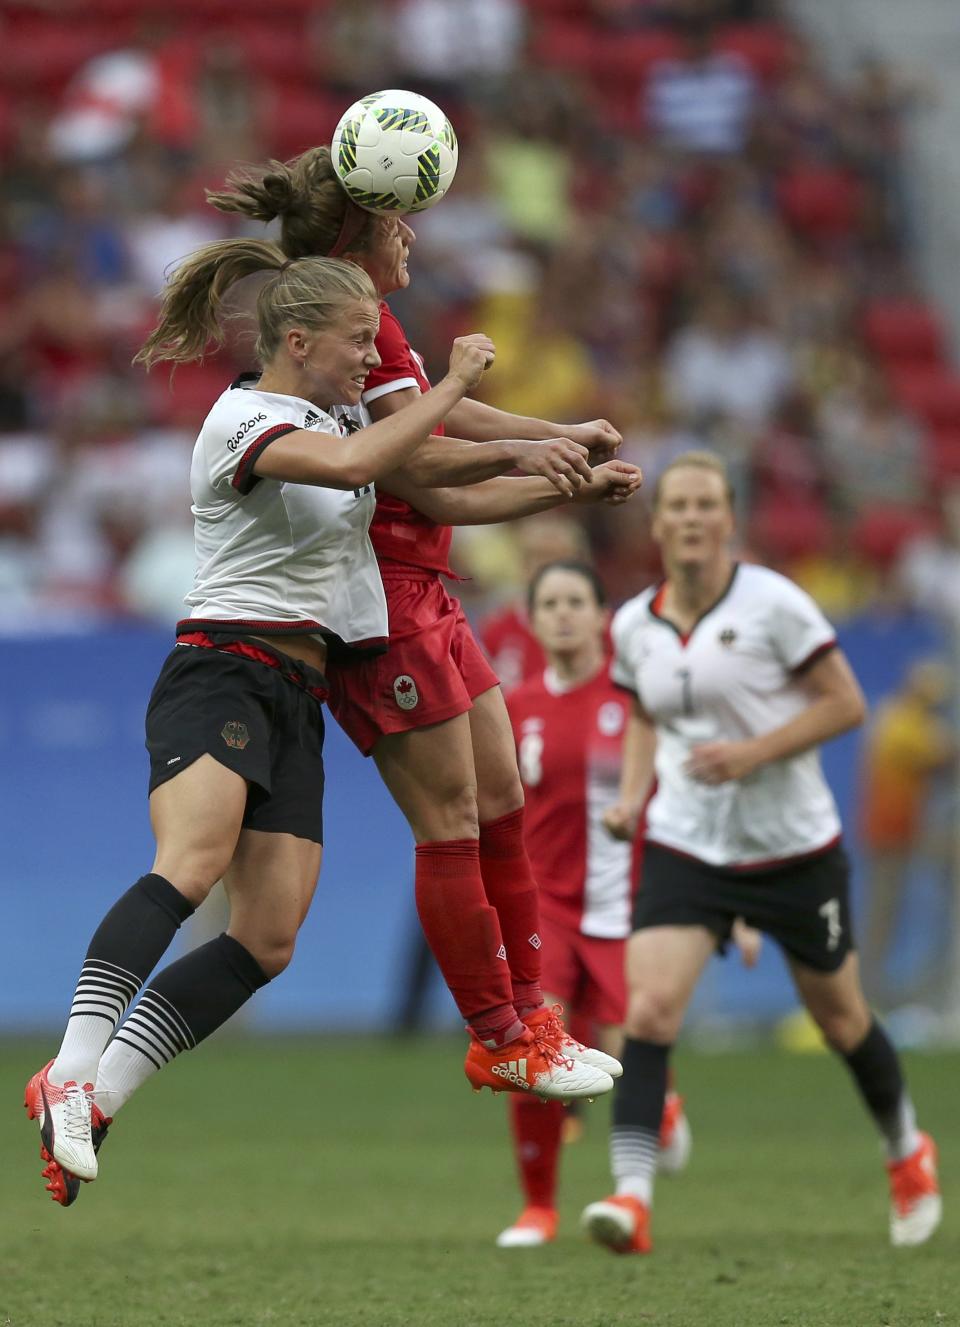 Football - Women's First Round - Group F Germany v Canada